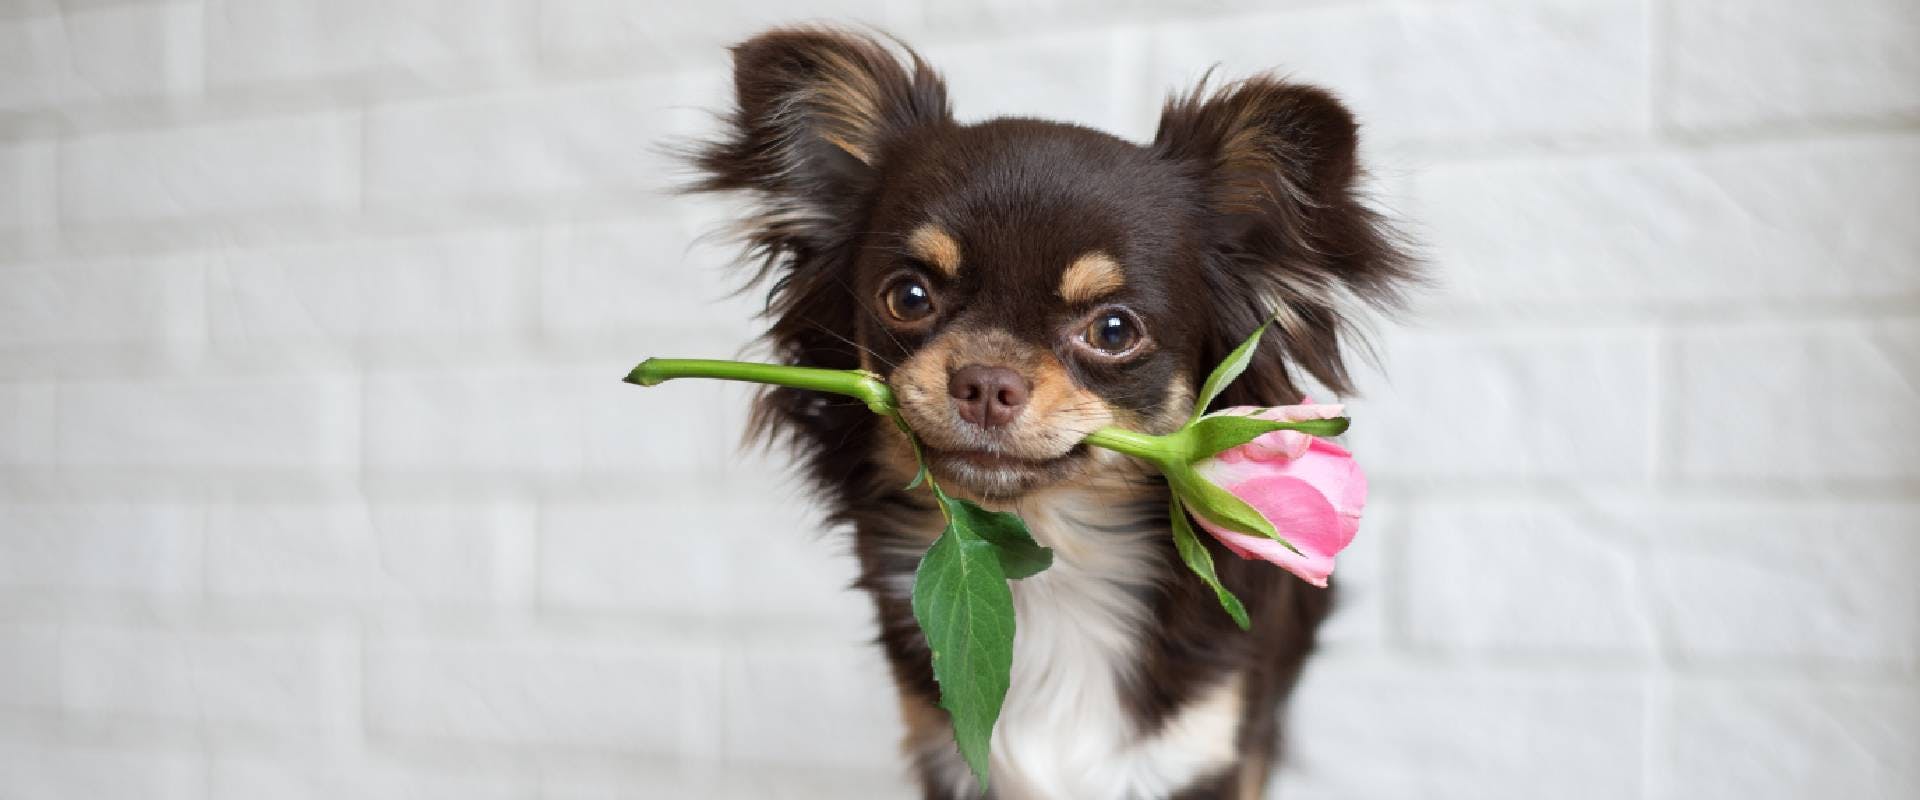 Chihuahua with a pink rose in their mouth